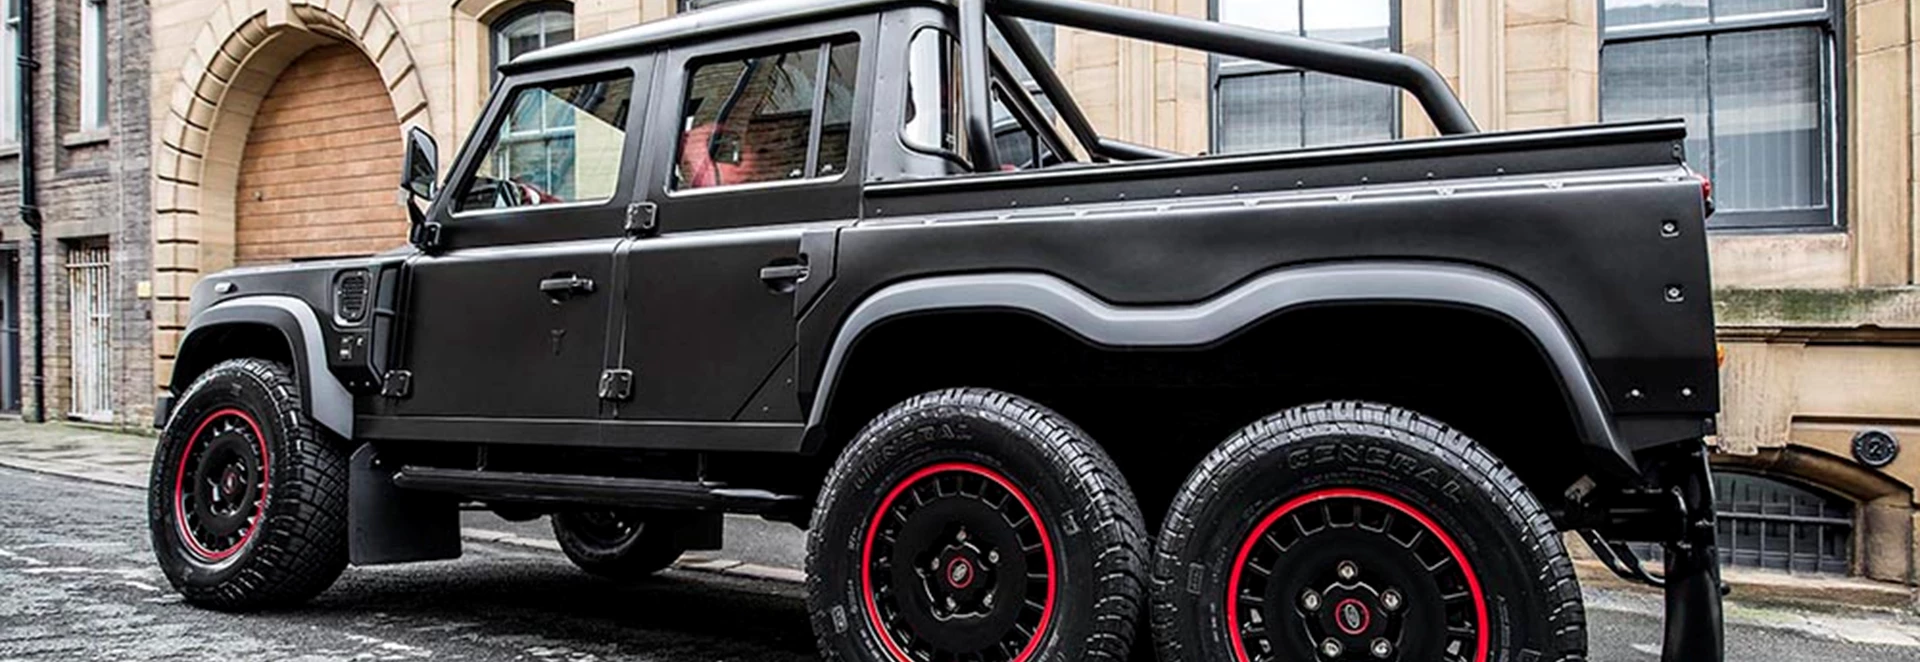 Kahn Automobiles sends off the Land Rover Defender in style